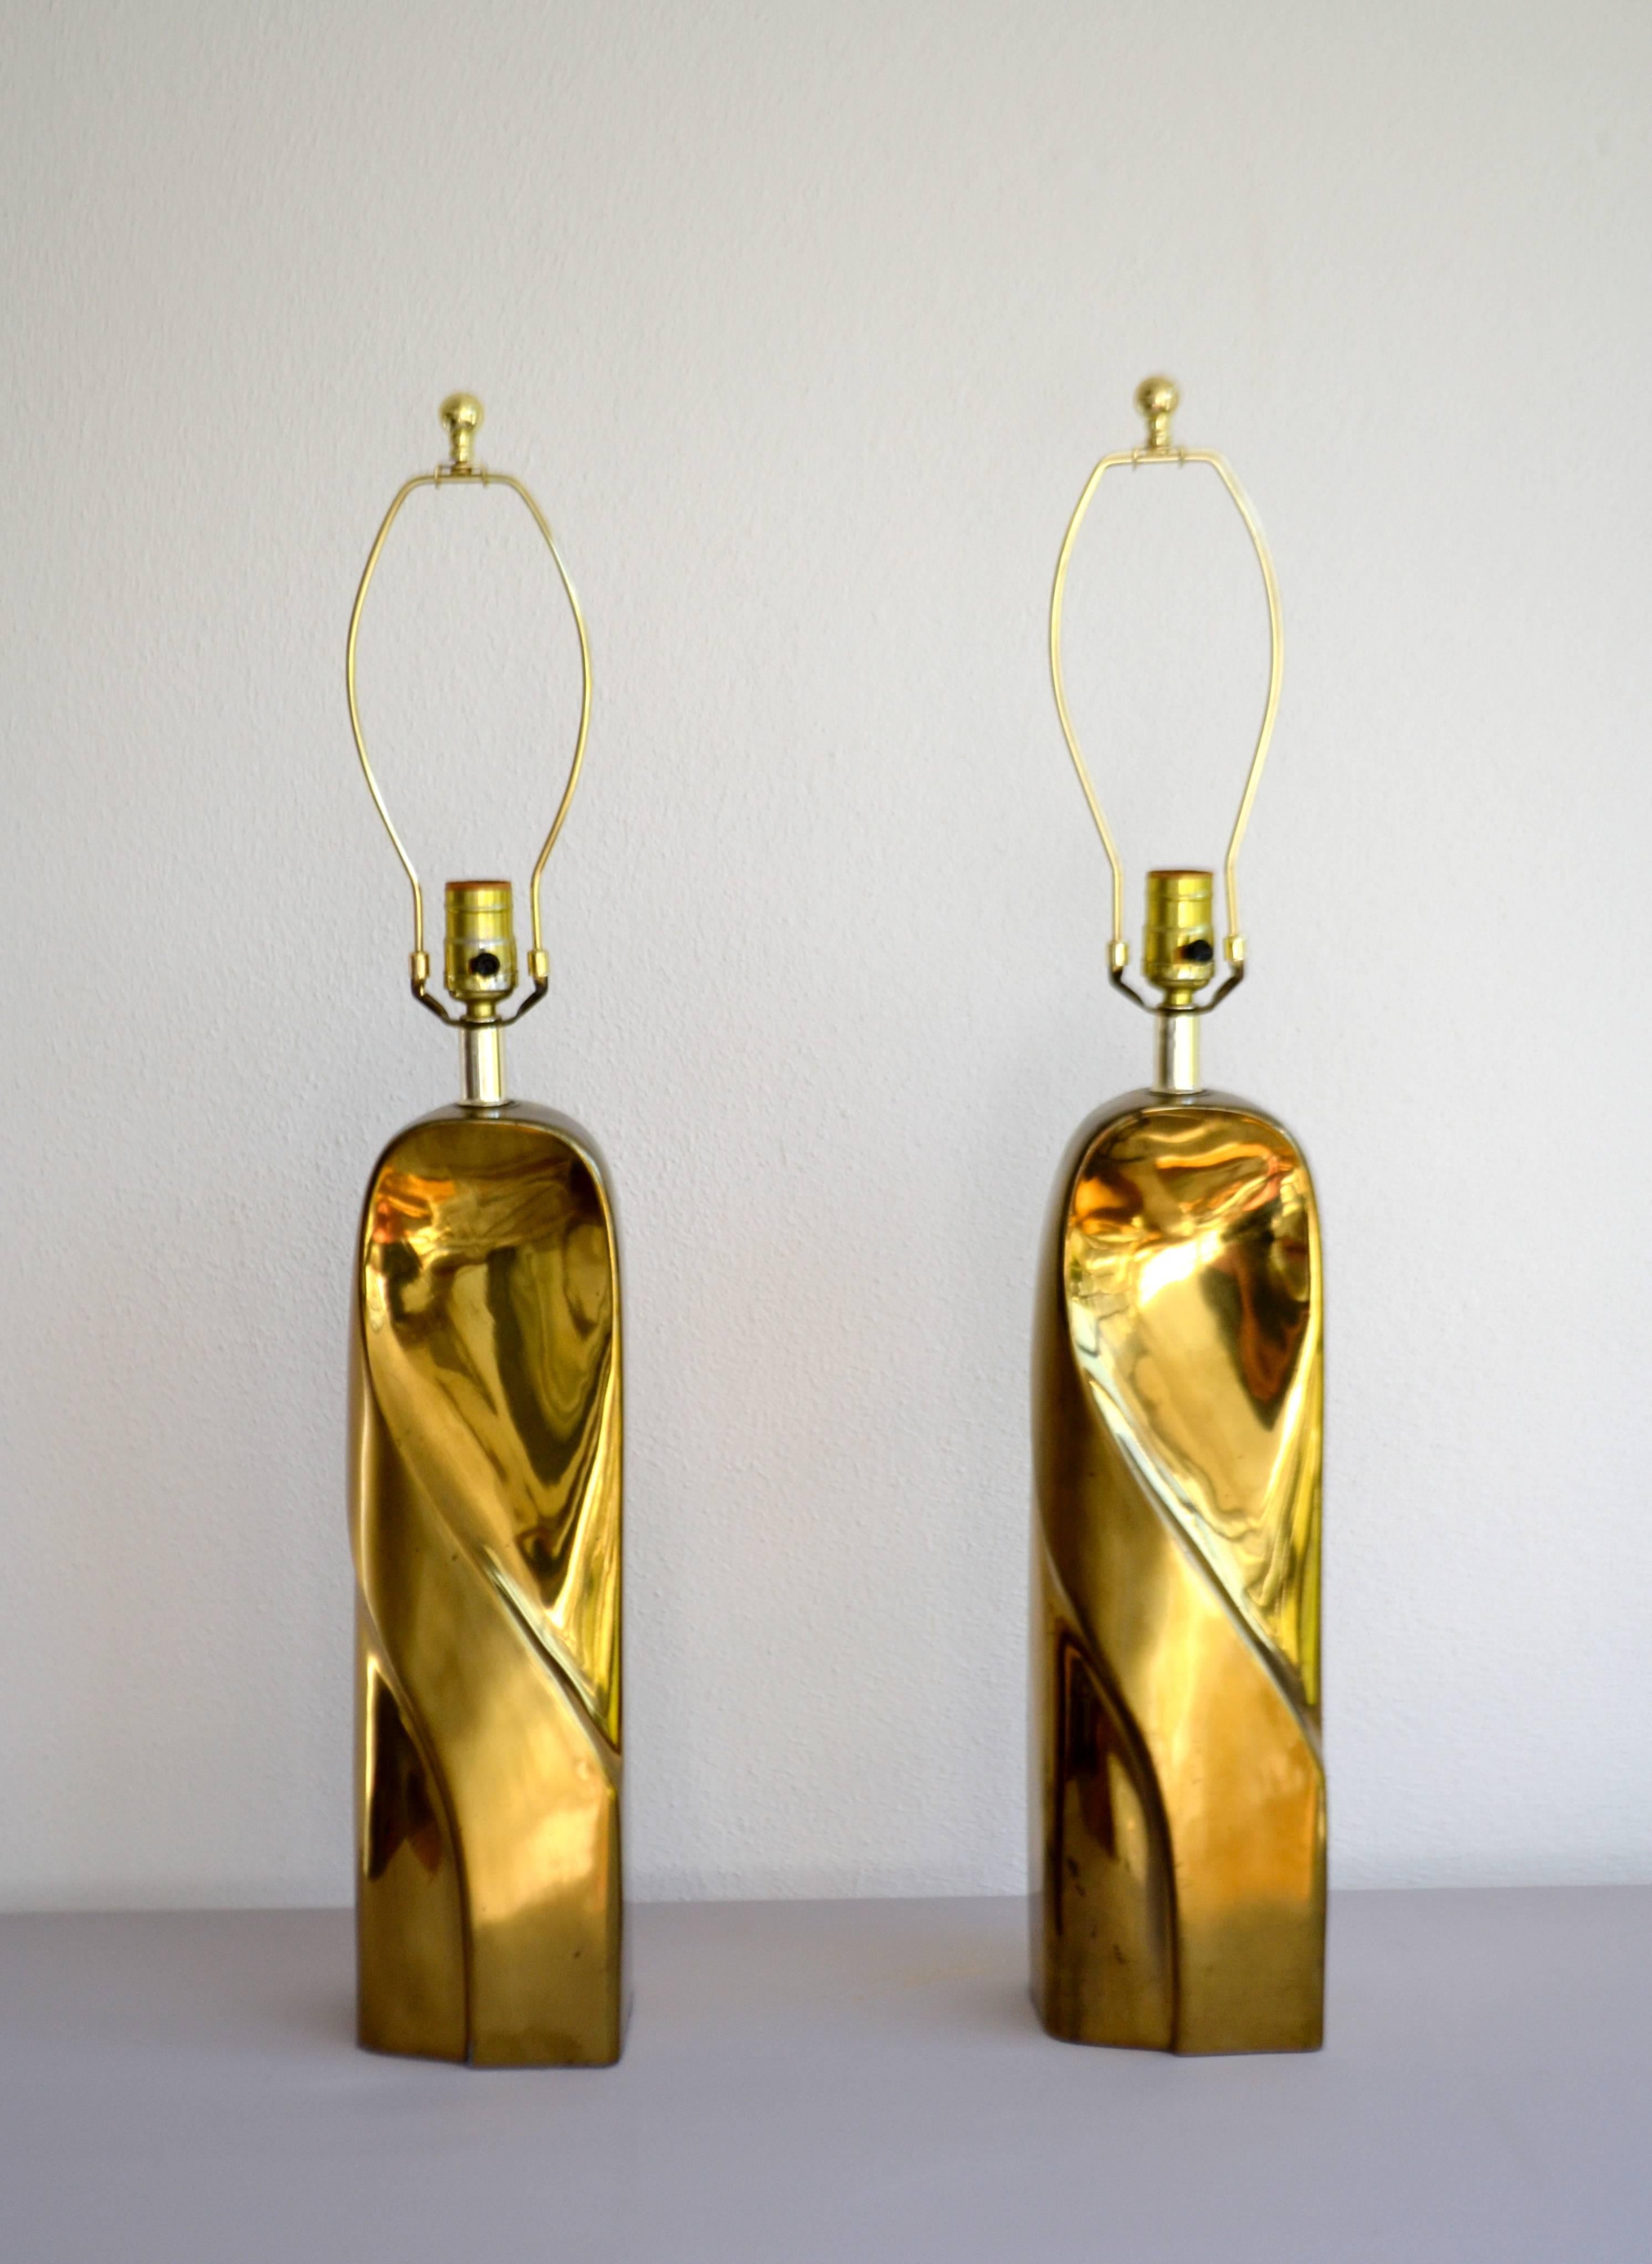 Glamour pair of Postmodern polished brass graphic form table lamps, circa 1970s-1980s.
Shades not included.

Measurements:
Overall: 32